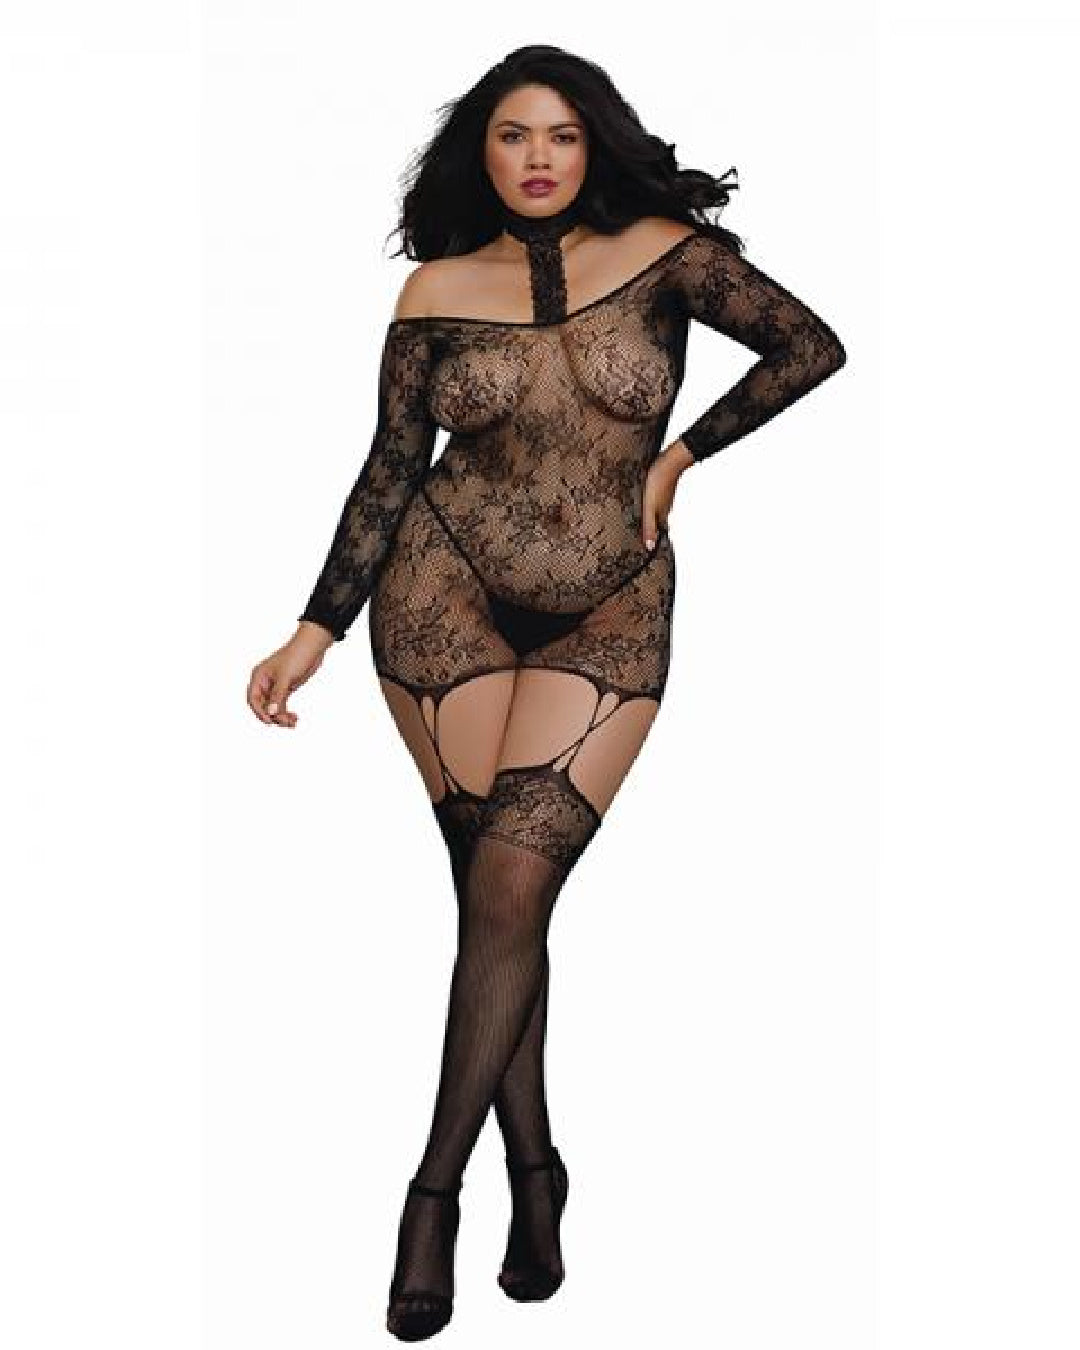 Dreamgirl Black Lace Garter Dress and Attached Stockings Queen One Size